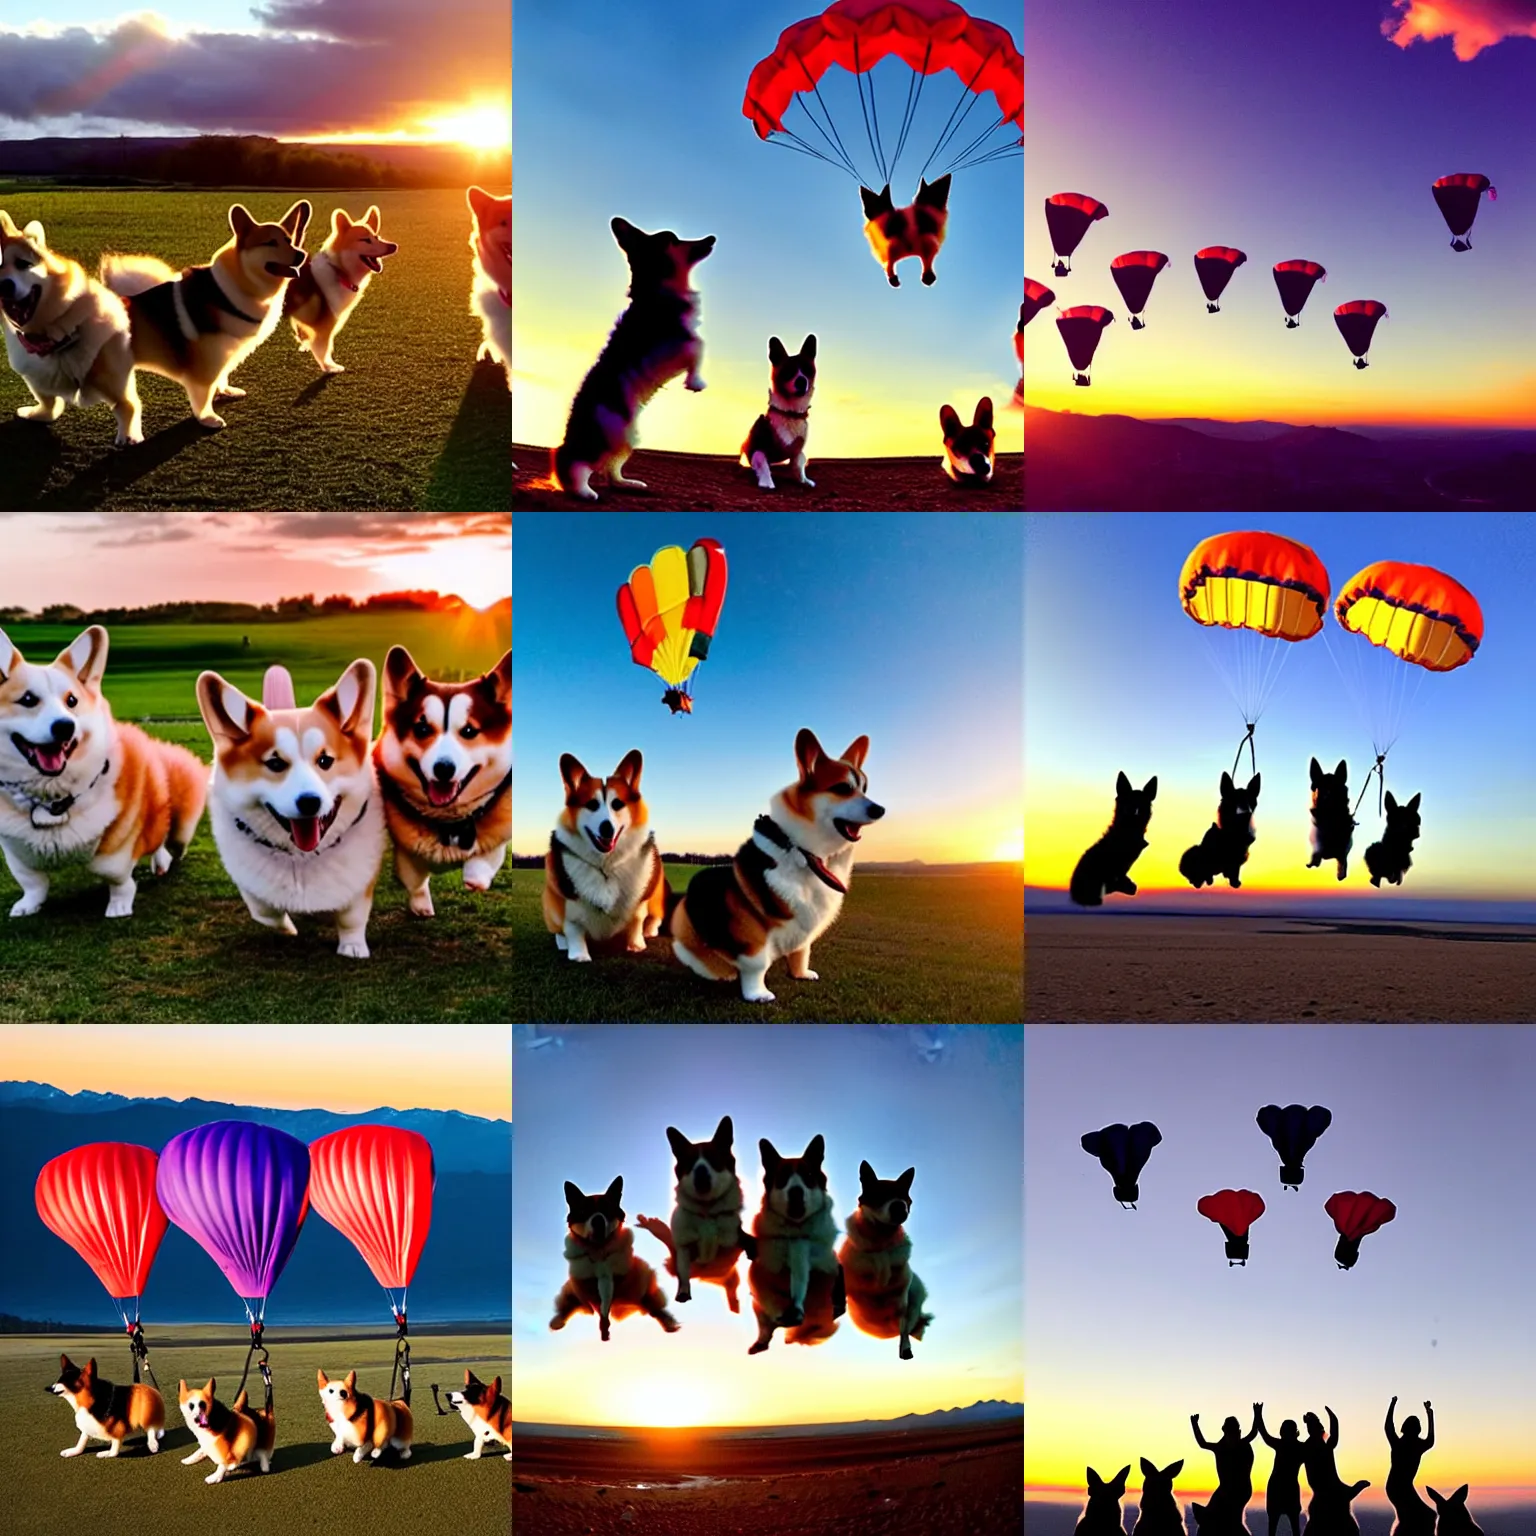 Prompt: A group of cute corgies parachuting with an epic sunset in the background